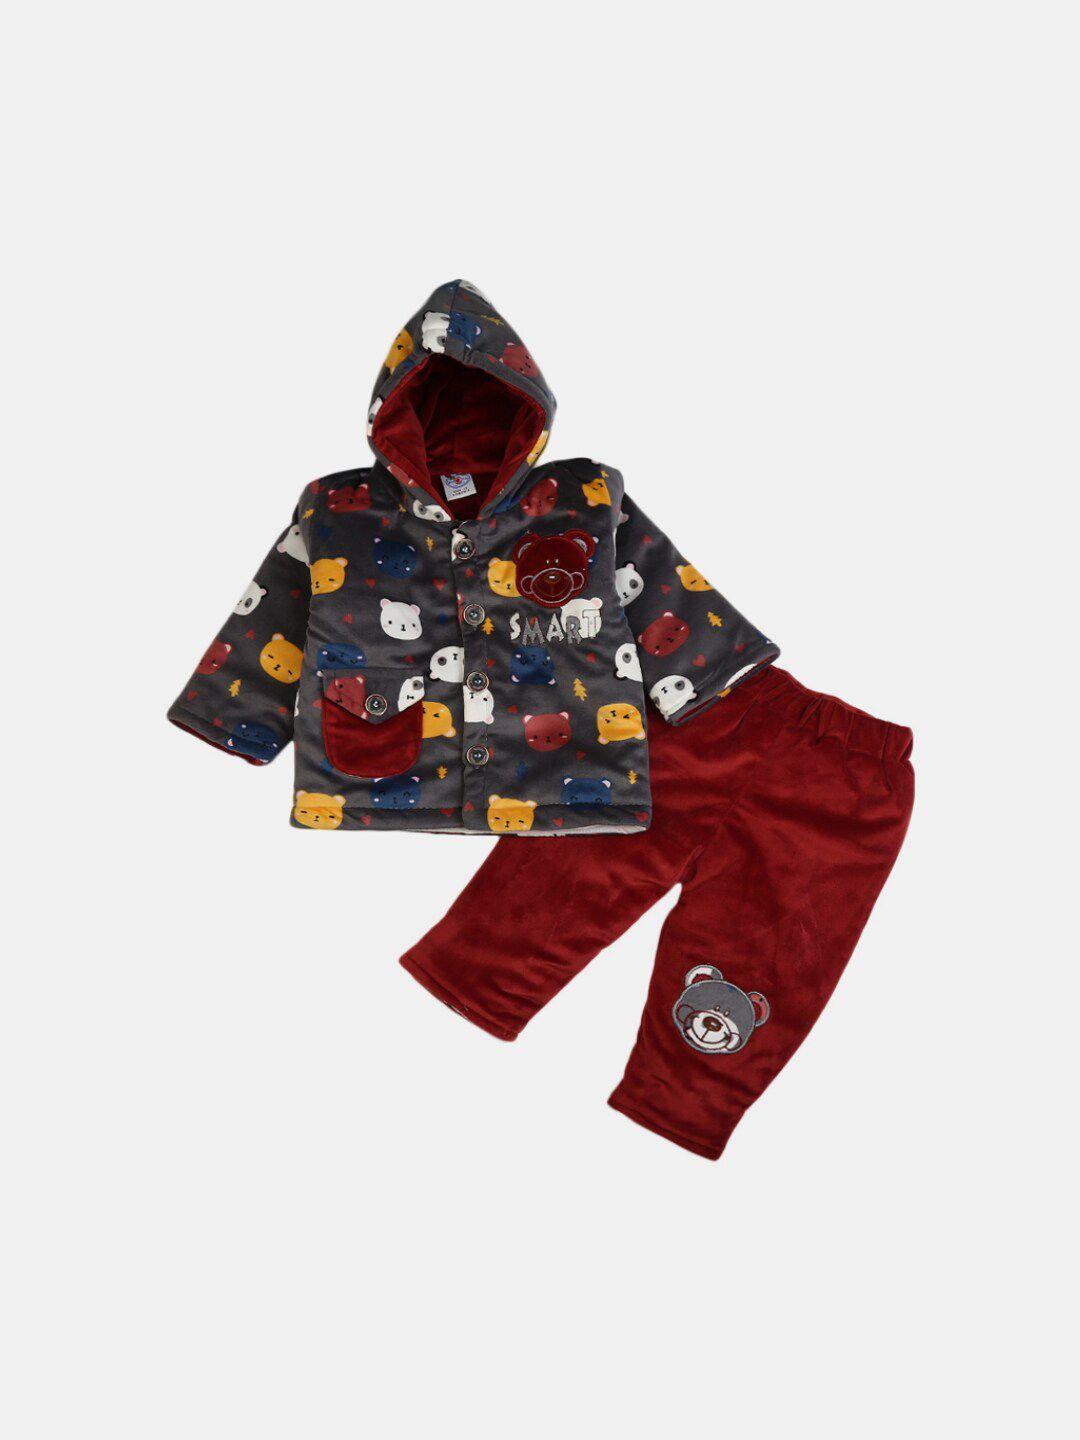 v-mart unisex kids grey & maroon printed shirt with trousers